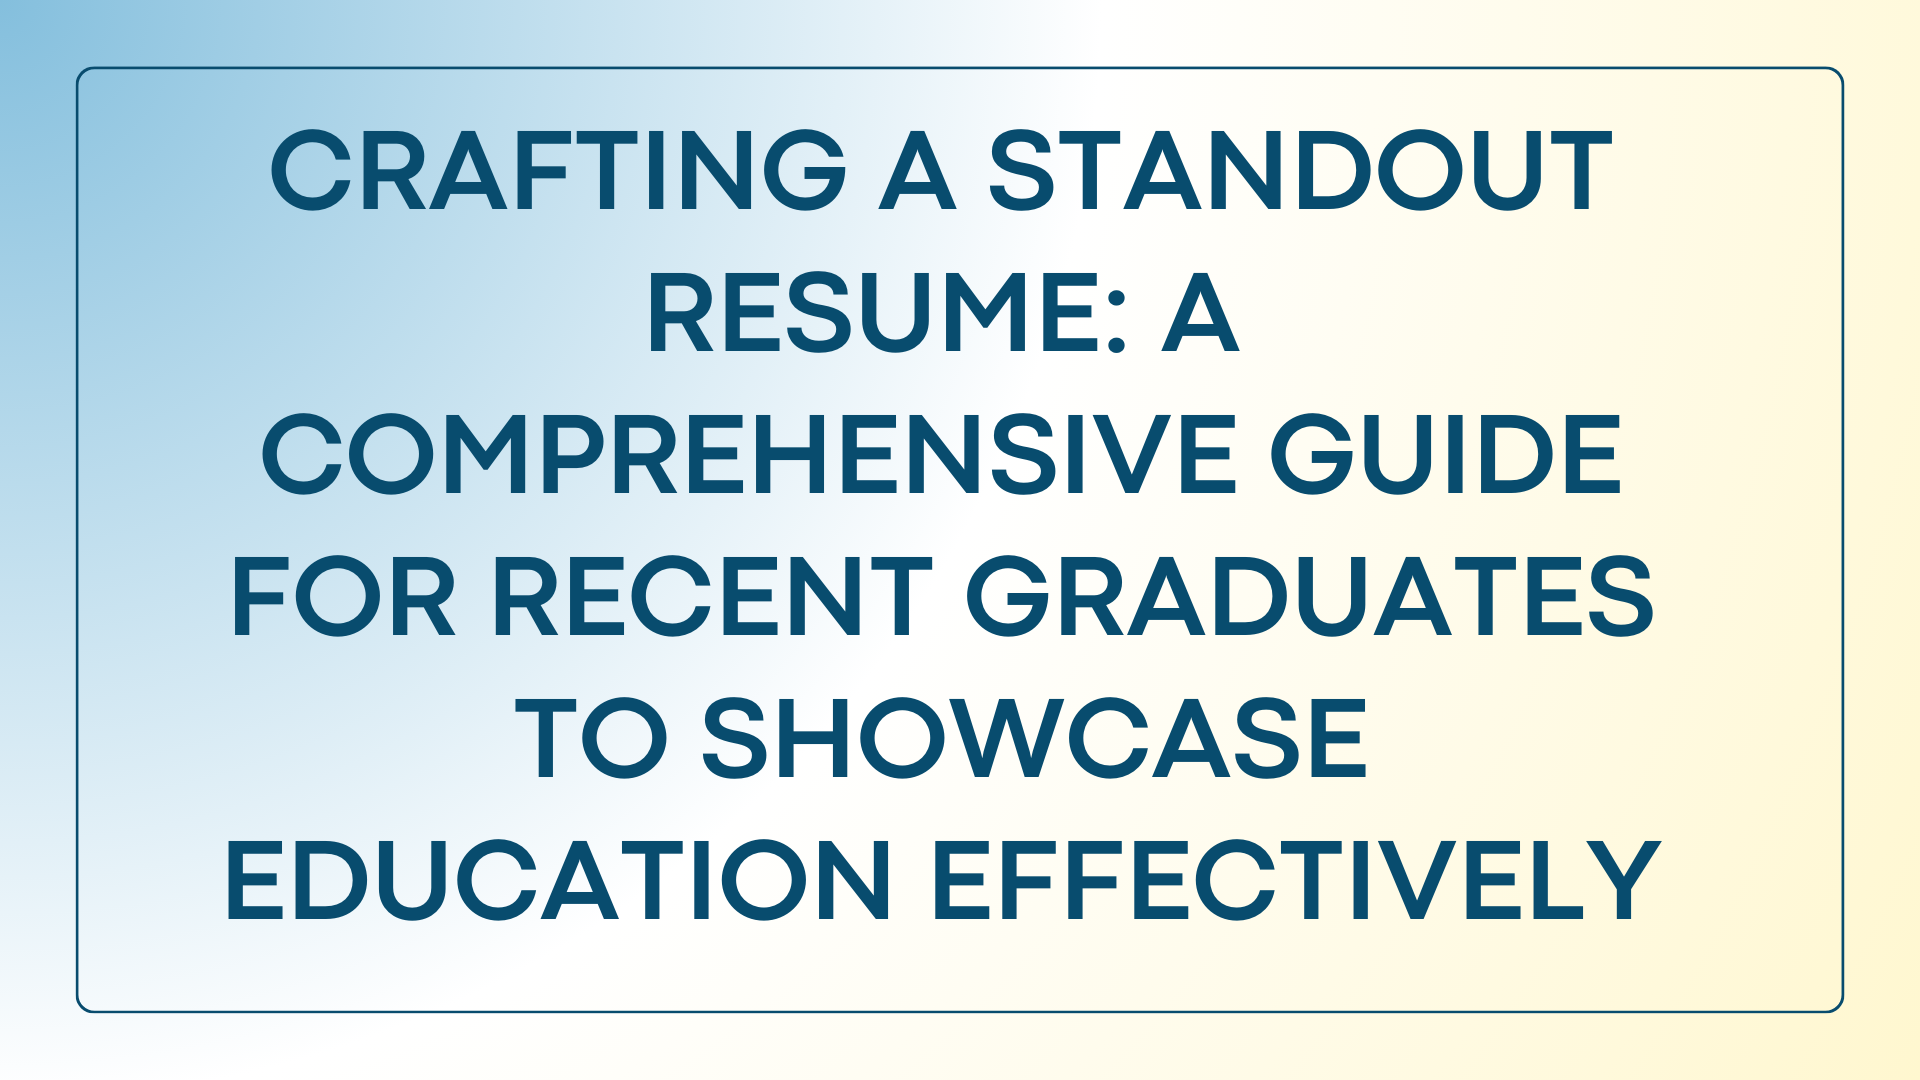 Crafting a Standout Resume: A Comprehensive Guide for Recent Graduates to Showcase Education Effectively